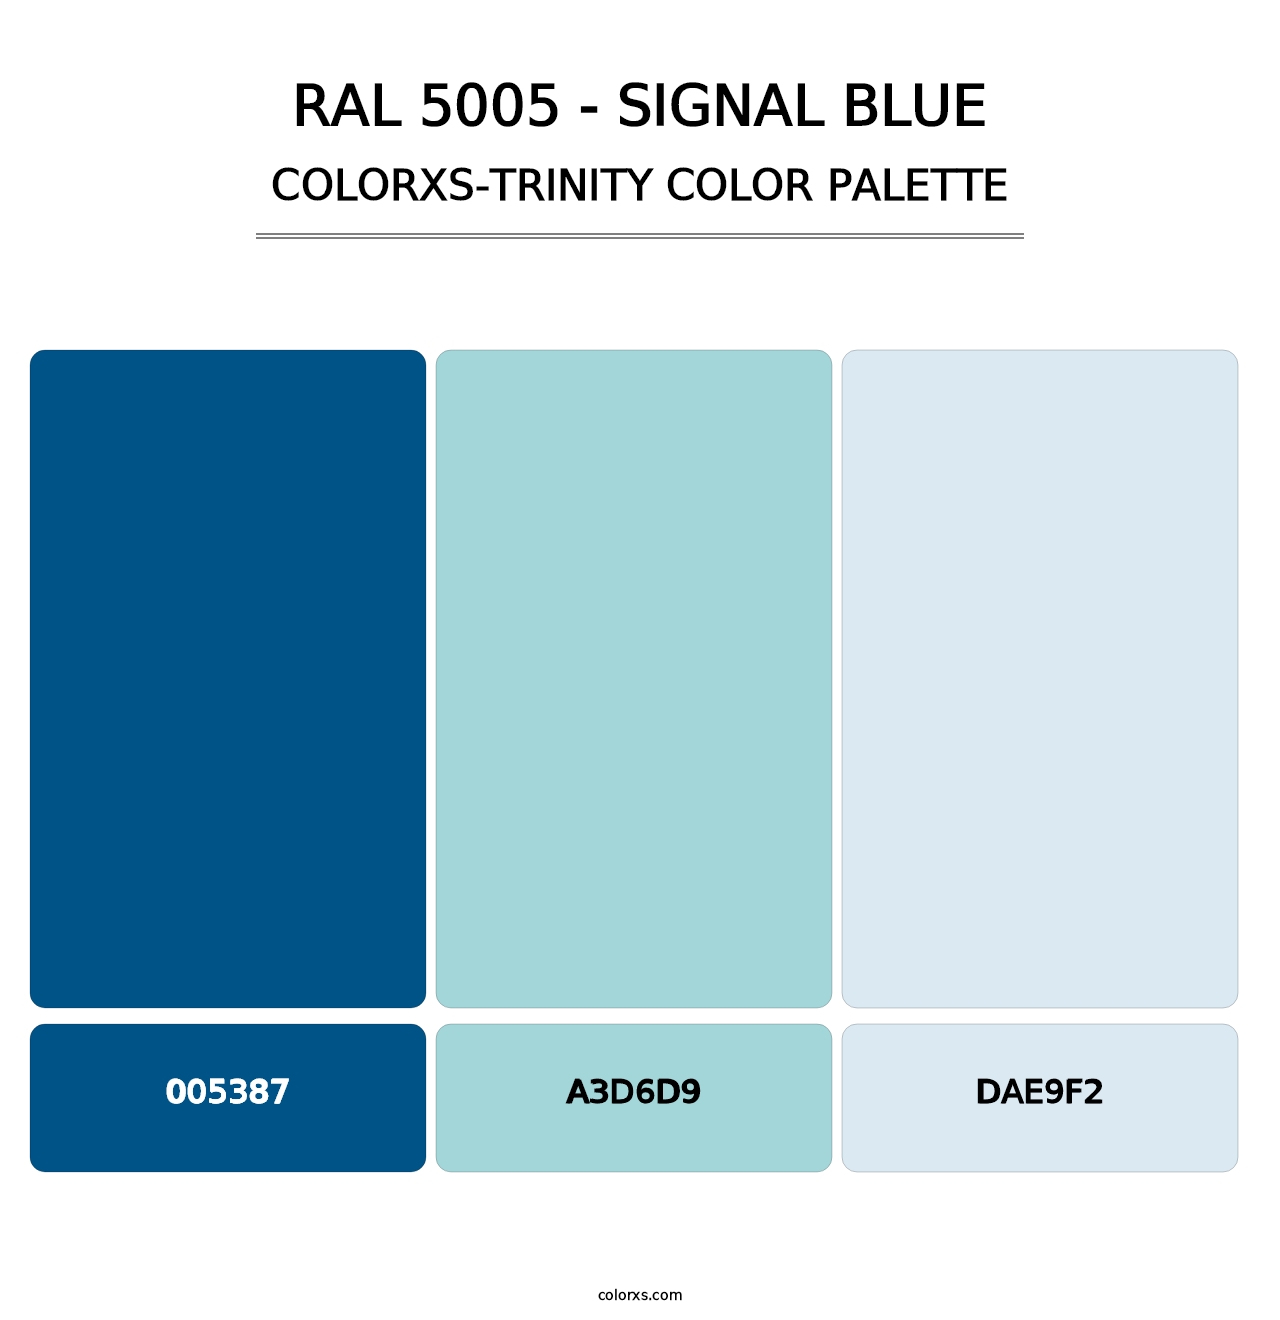 RAL 5005 - Signal Blue - Colorxs Trinity Palette